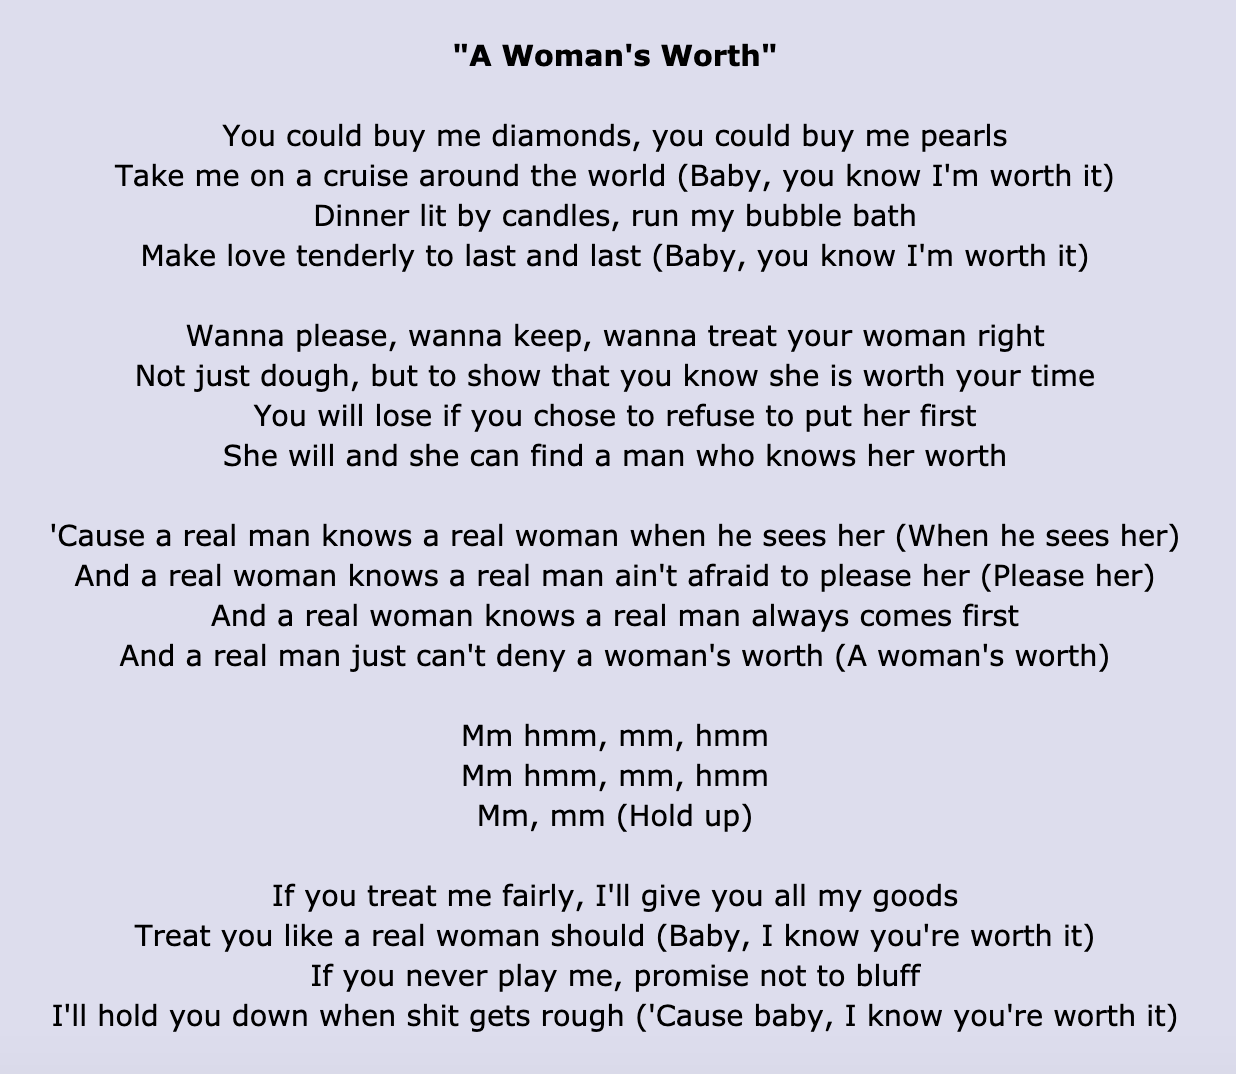 &quot;A Woman&#x27;s Worth&quot; lyrics: &quot;&#x27;Cause a real man knows a real woman when he sees her/And a real woman knows a real man ain&#x27;t afraid to please her&quot;